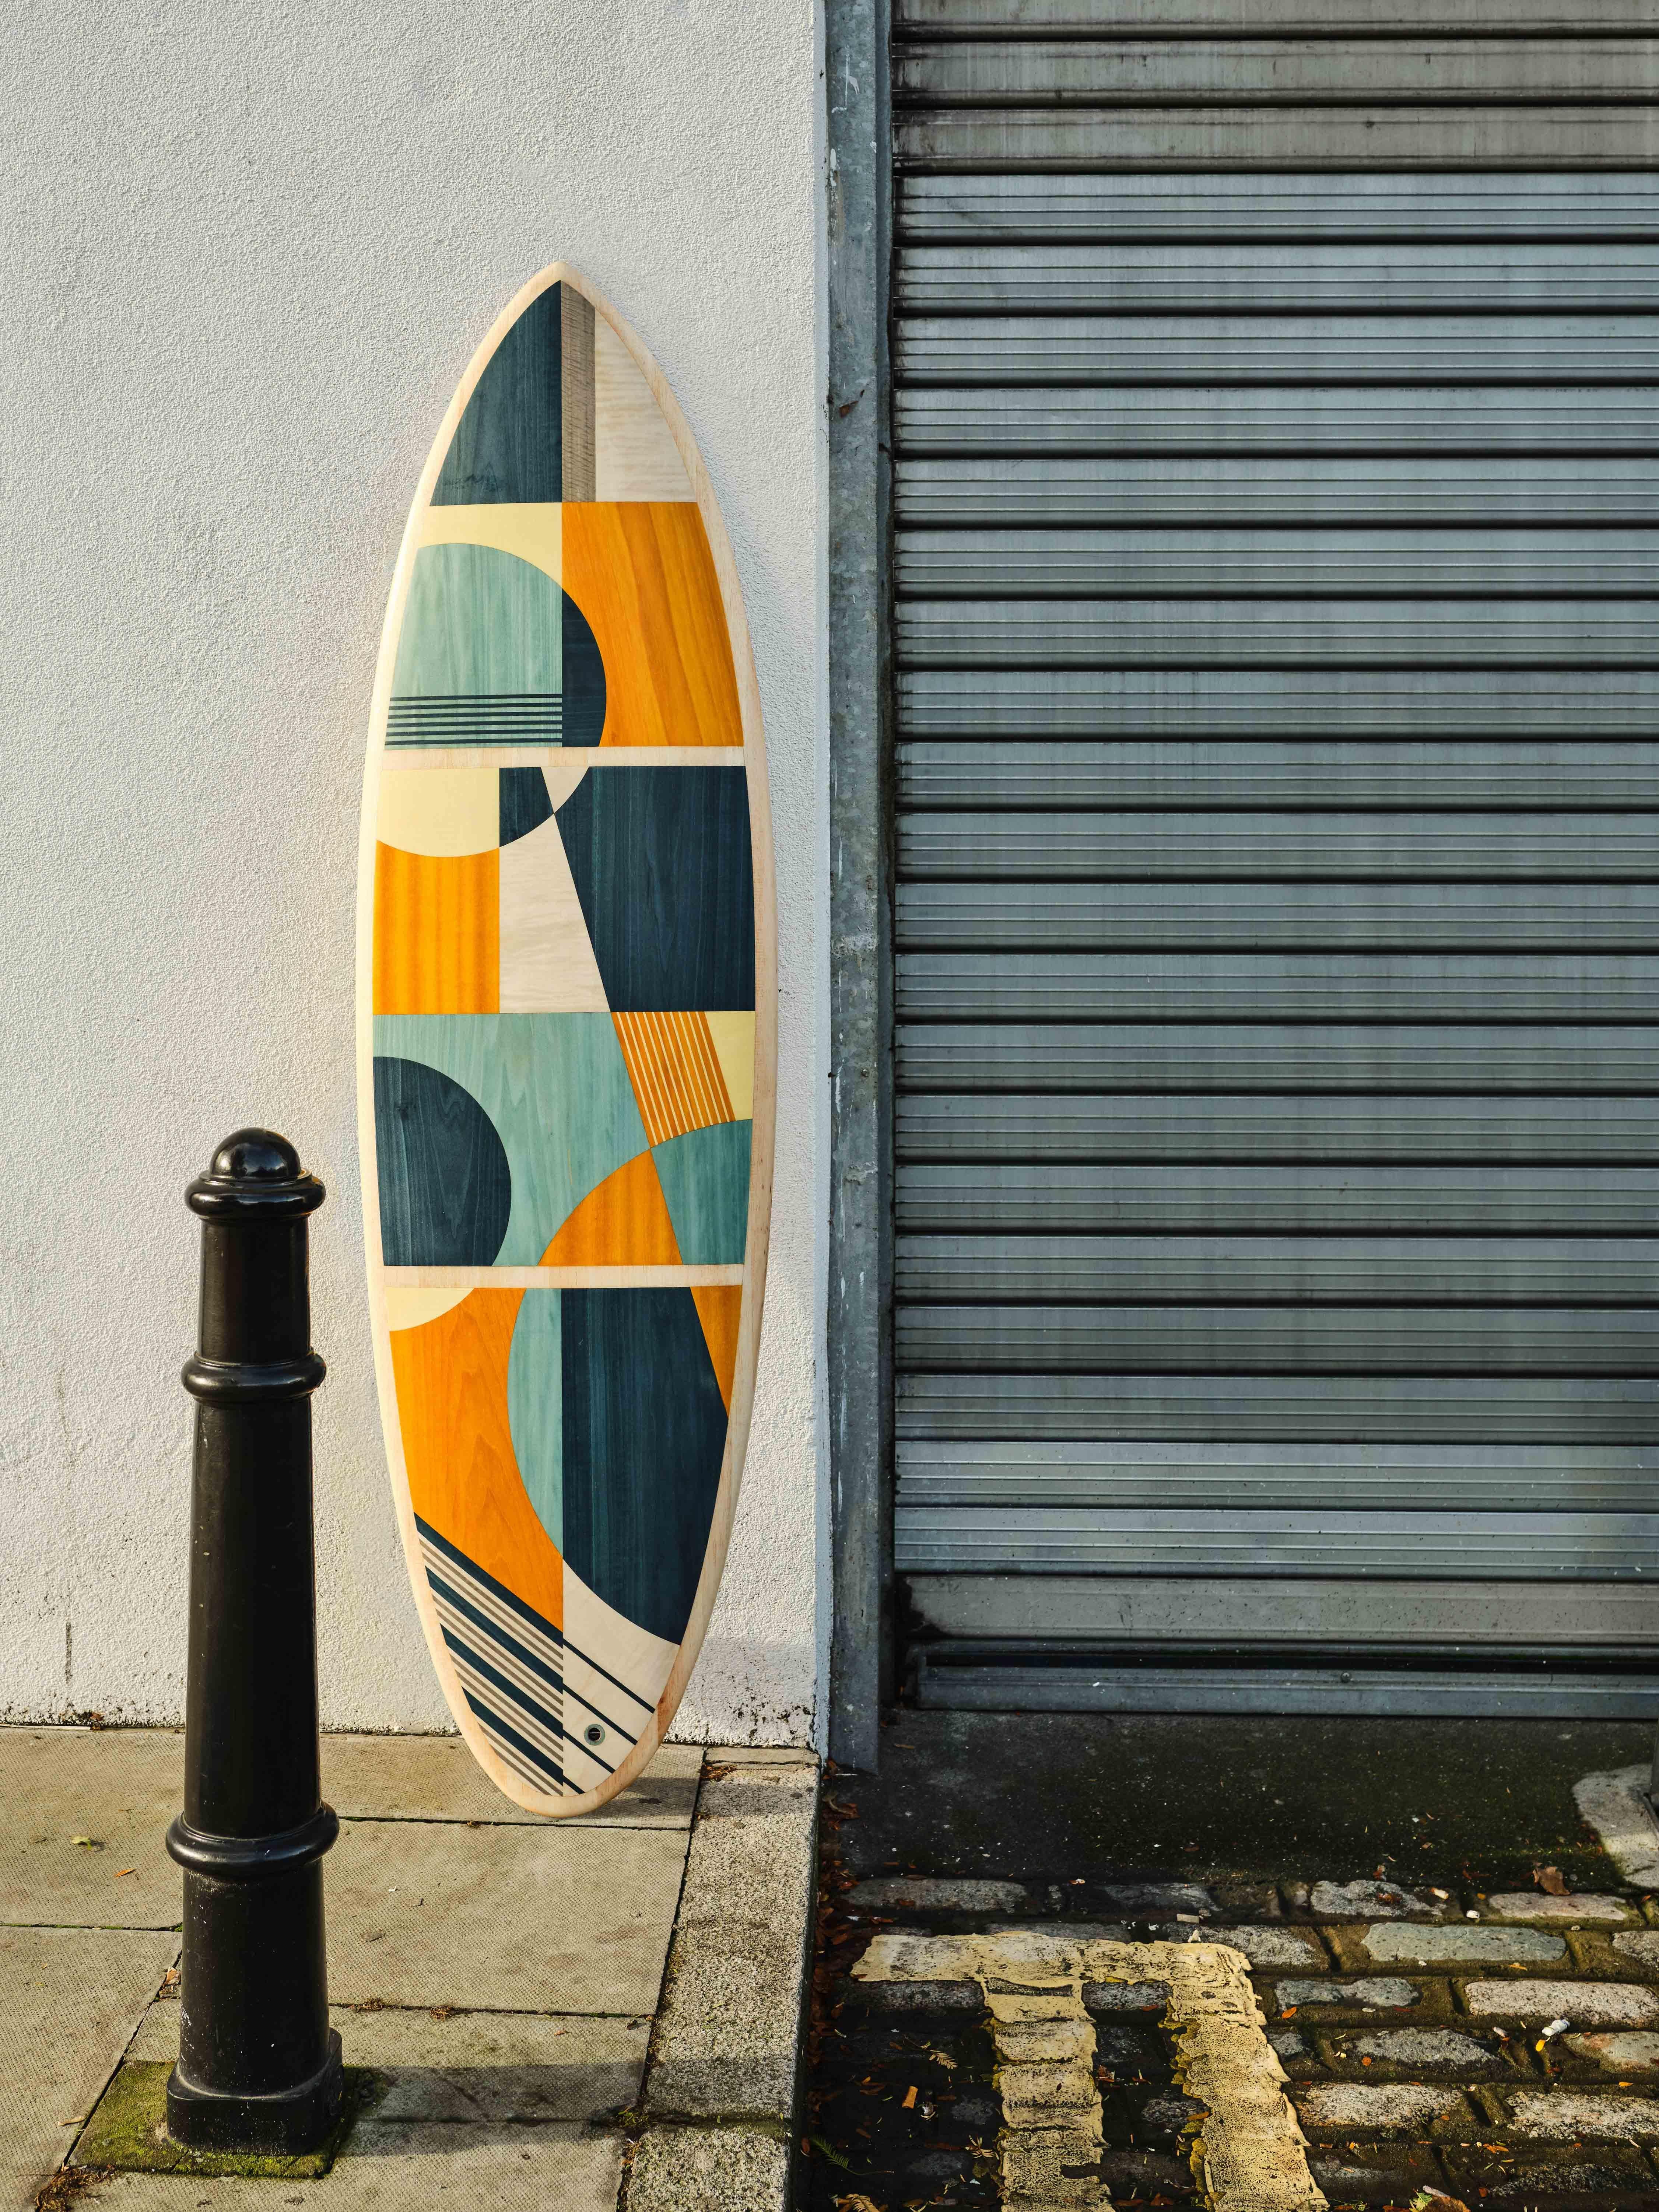 This is a unique custom surfboard featuring a marquetry deck, designed and hand-crafted by the w o o d p o p studio which specialises in marquetry and inlay work. 

The studio prides itself on constantly challenging the limits of where and how